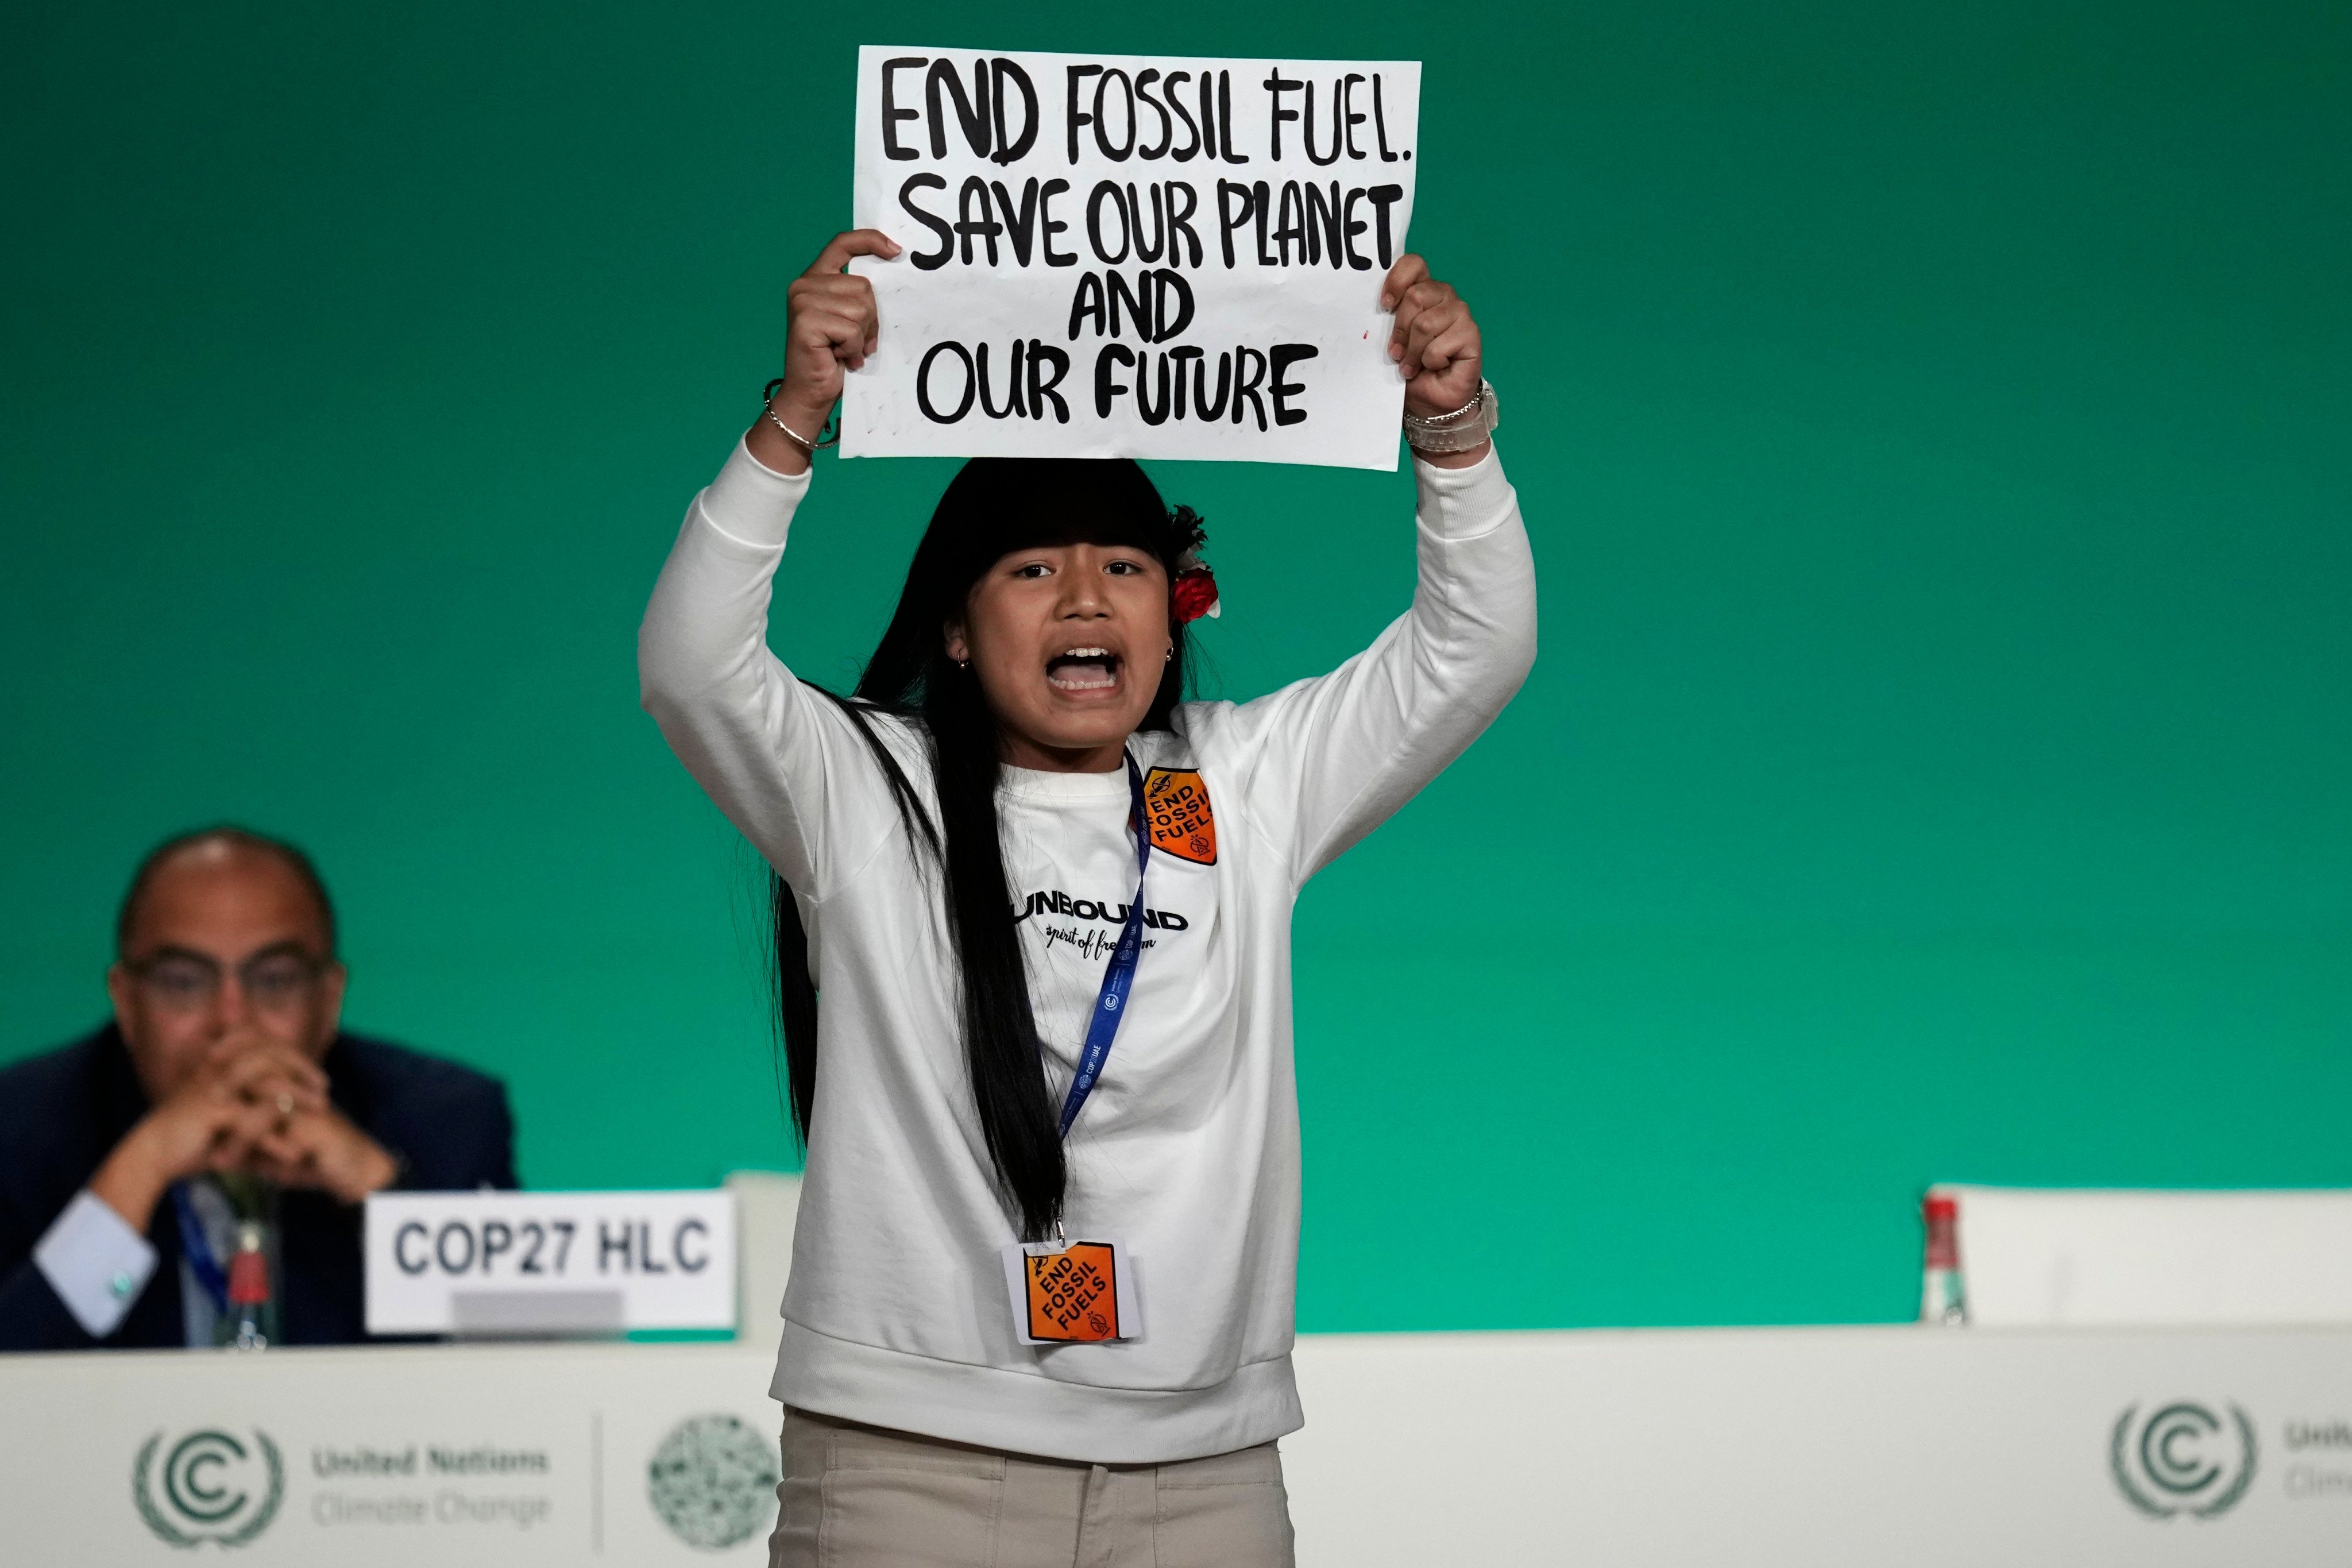 Licypriya Kangujam, a young environmental activist from India, protests against the use of fossil fuels during an event at Cop28 on December 11 in Dubai. Photo: AP 